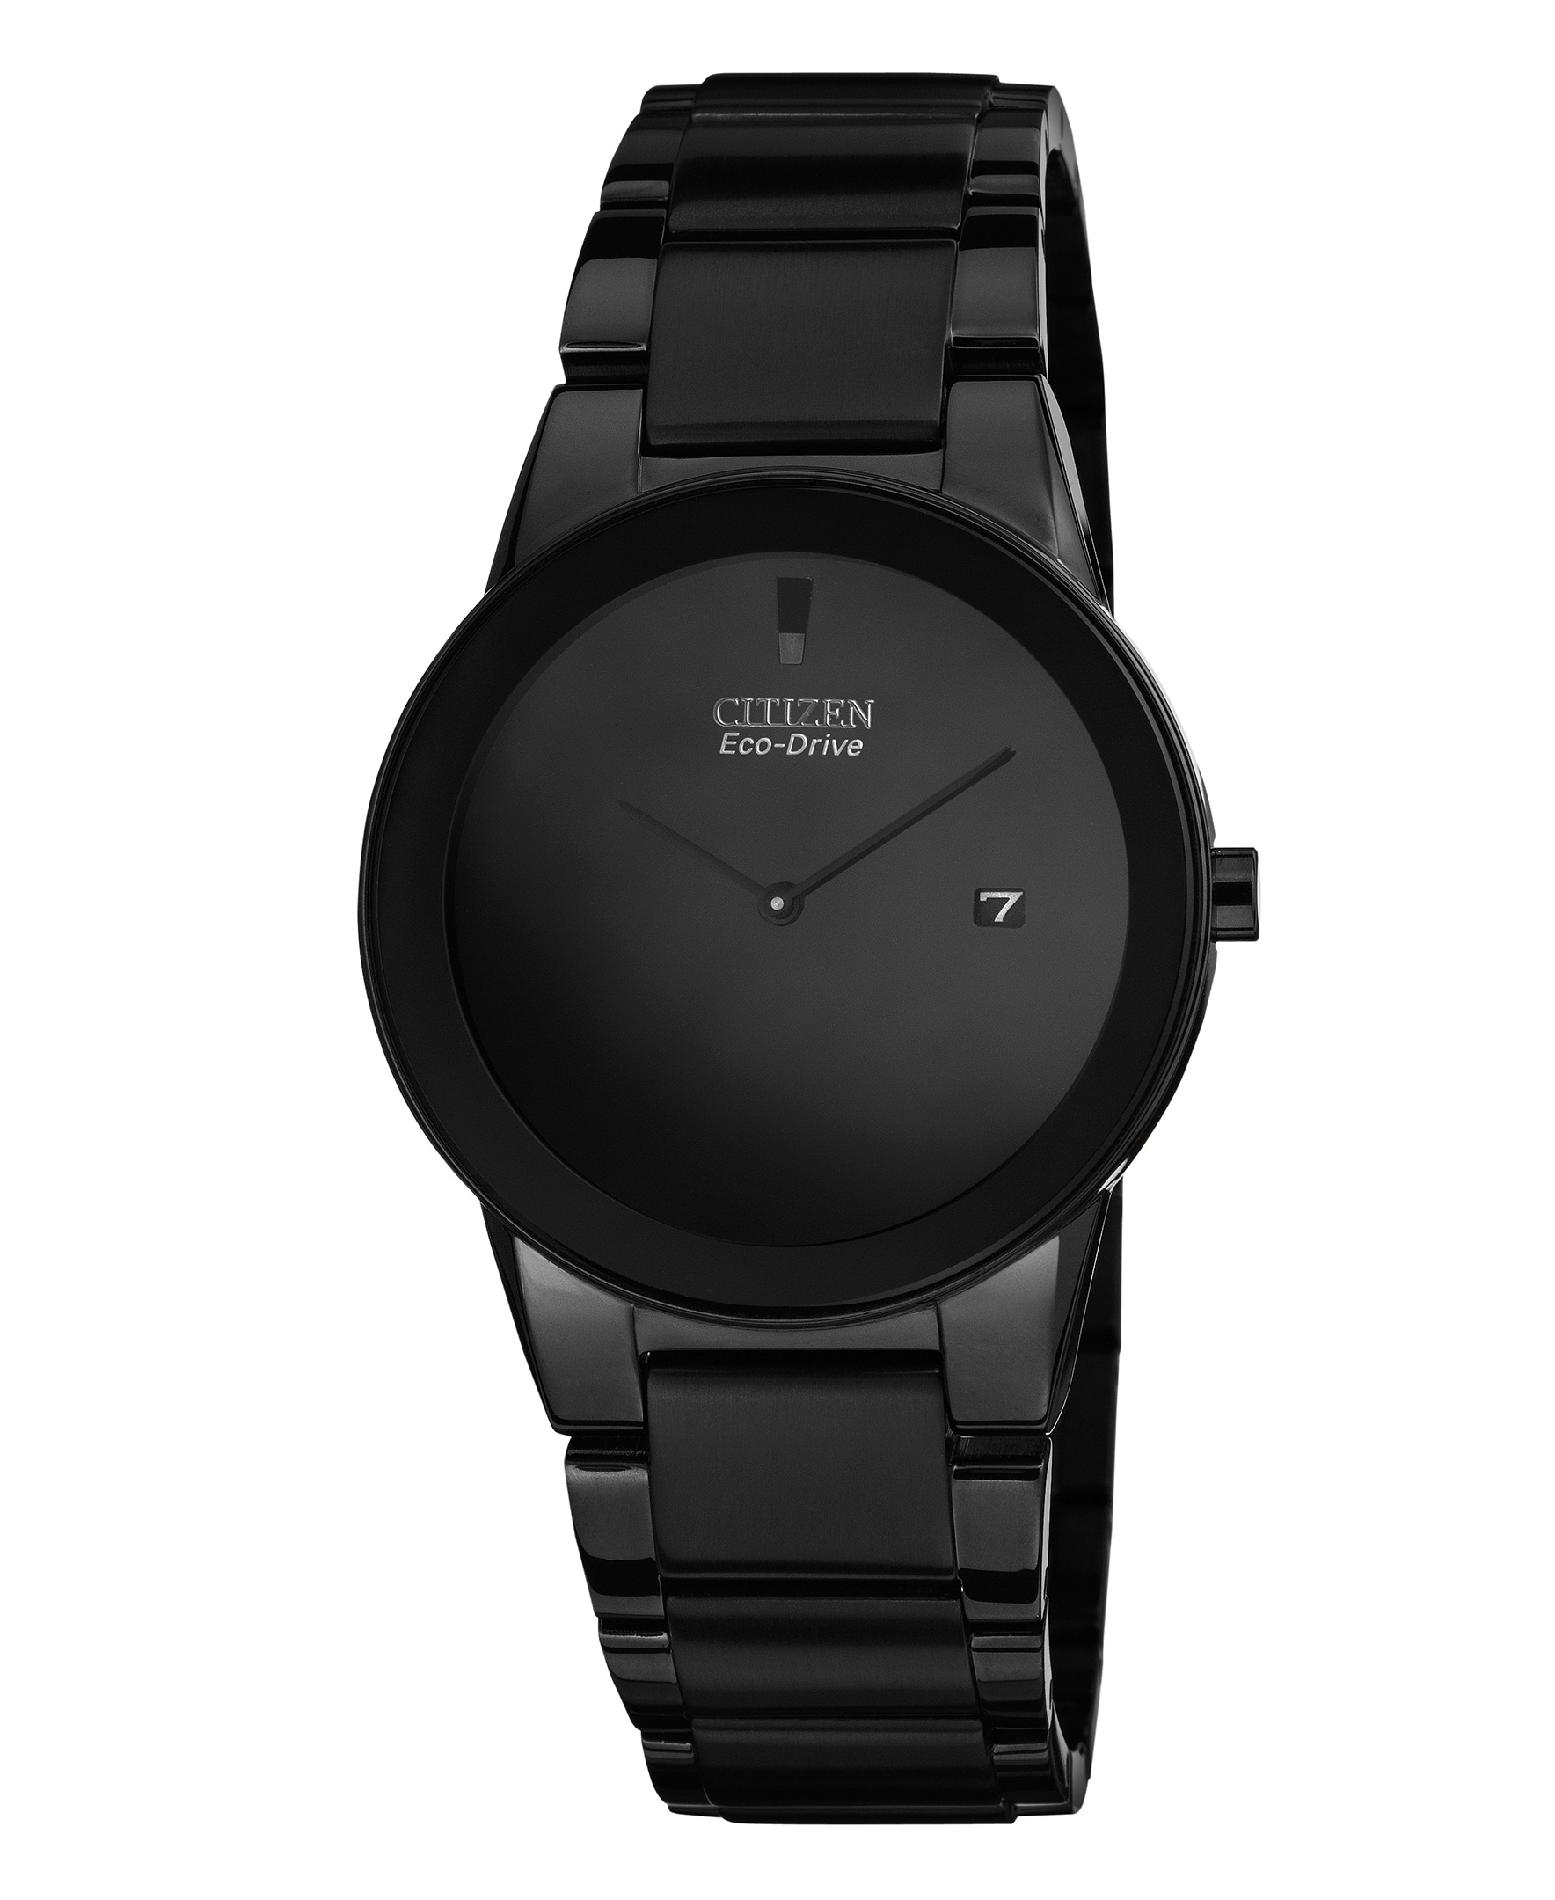 Citizen Men's Eco-Drive Black Ion Plated Axiom Watch